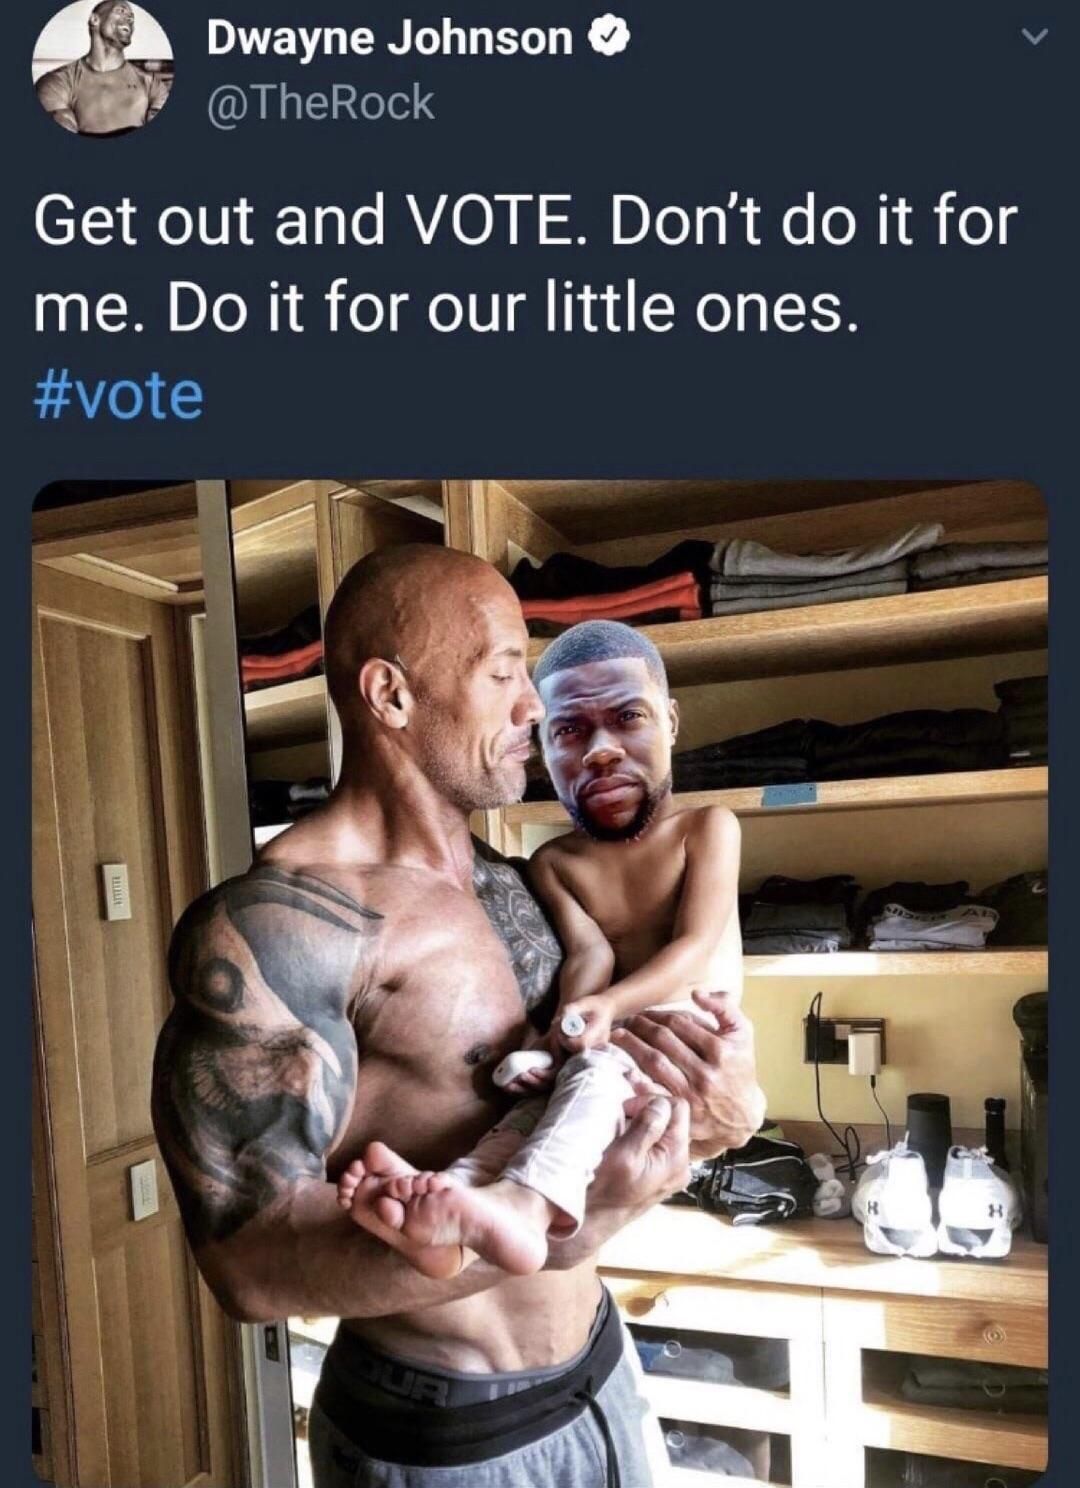 Do it for the little ones